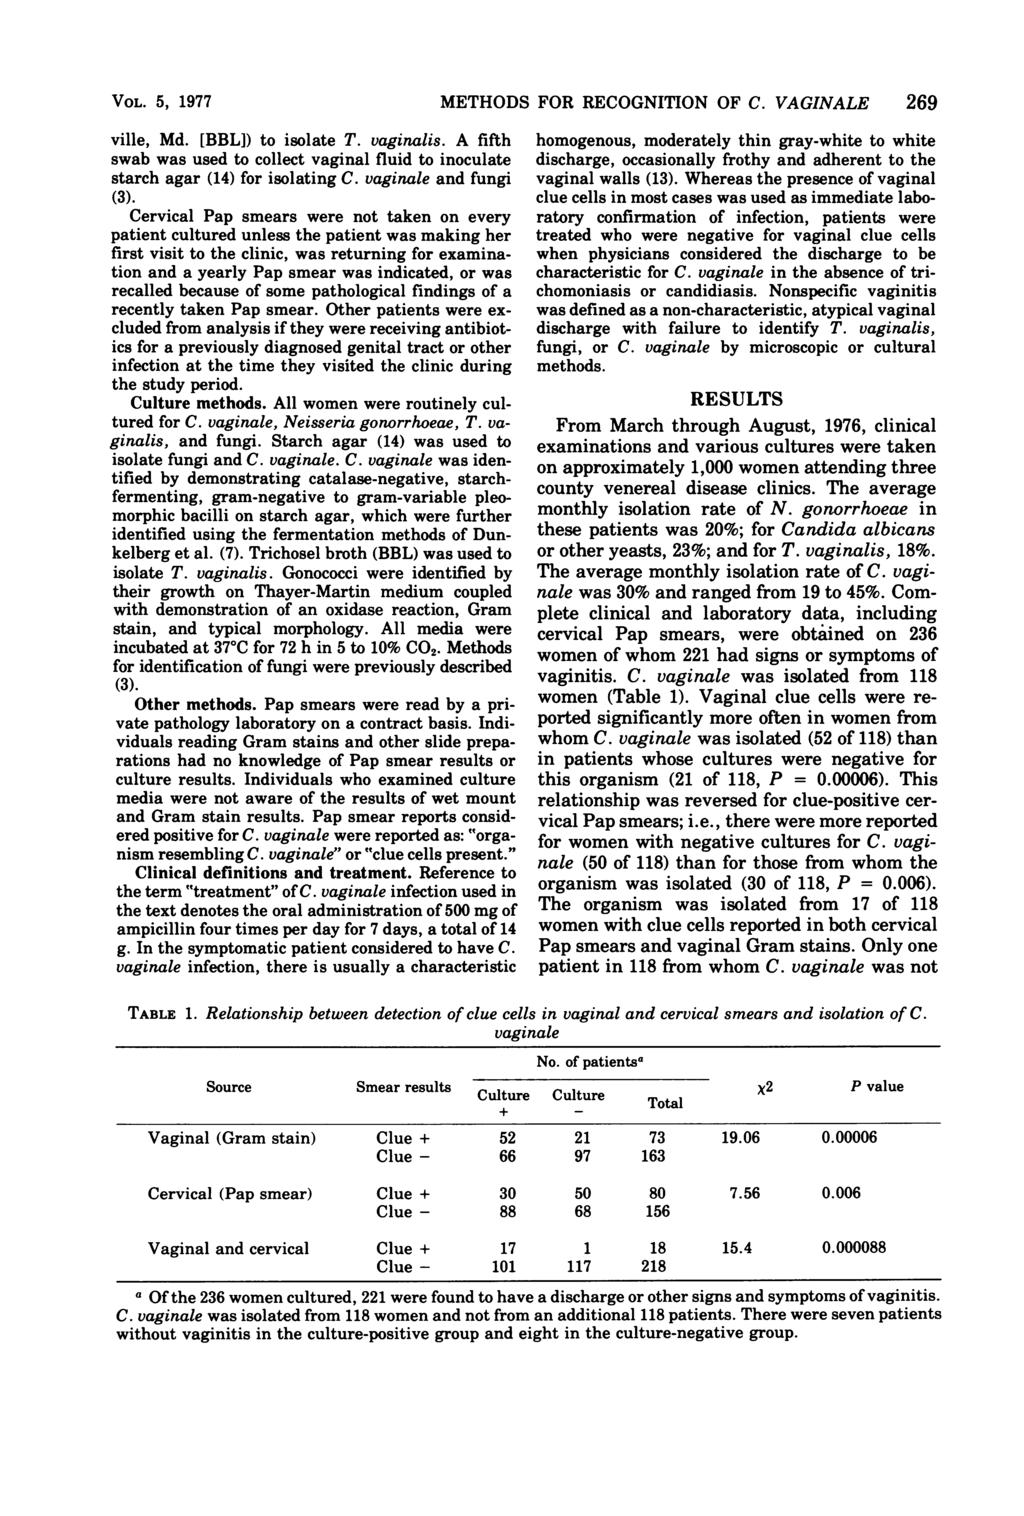 VOL. 5, 1977 ville, Md. [BBL]) to isolate T. vaginalis. A fifth swab was used to collect vaginal fluid to inoculate starch agar (14) for isolating C.